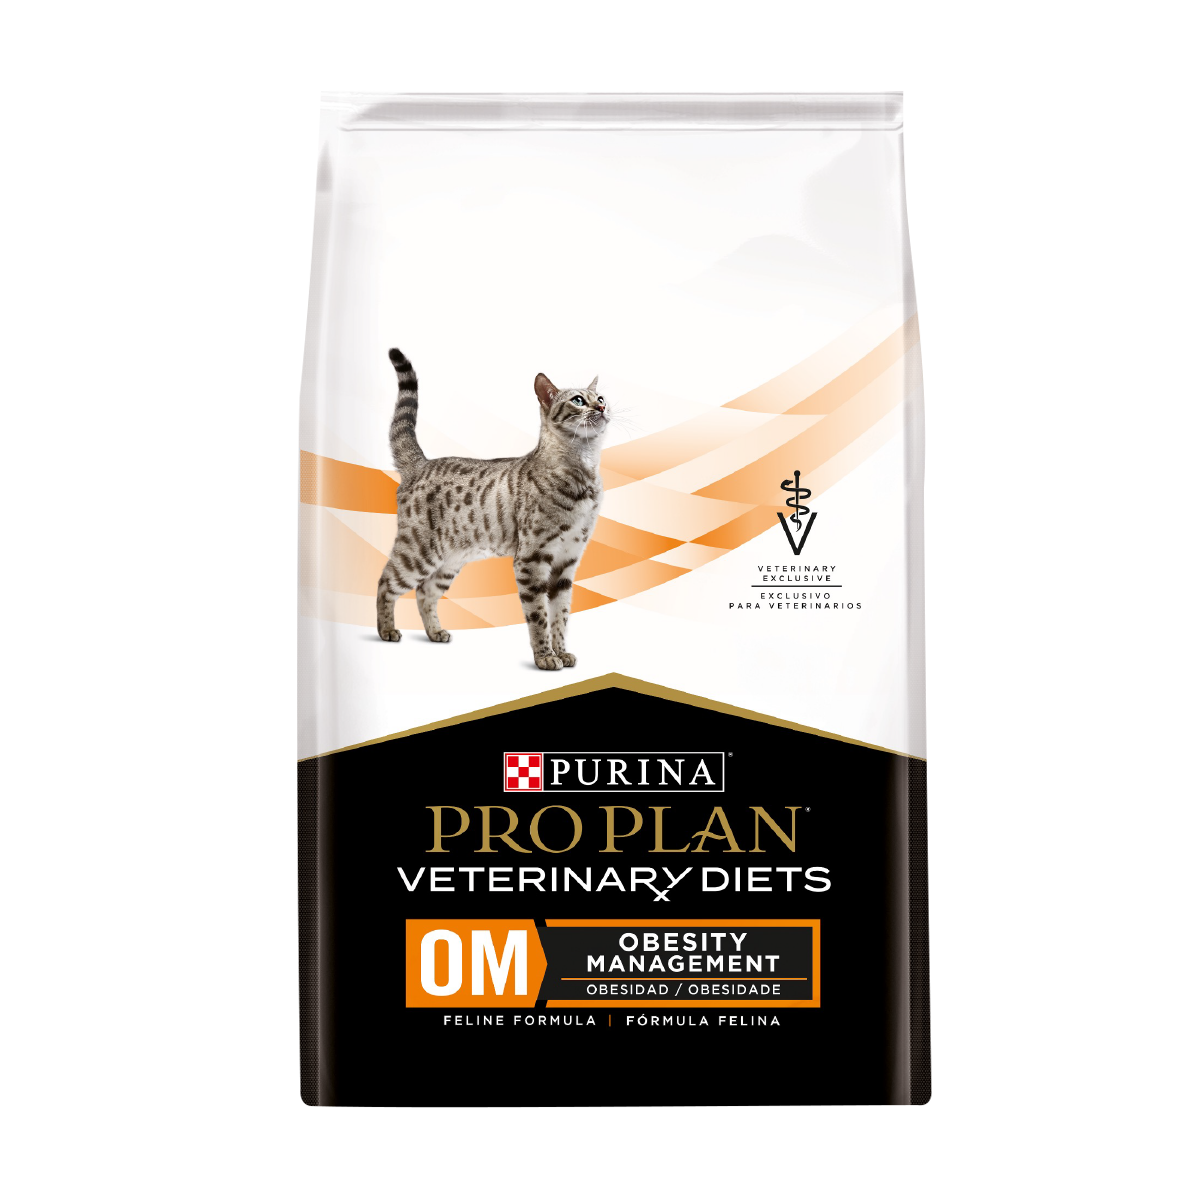 purina-pro-plan-veterinay-diets-cat-om-obesity-management.png